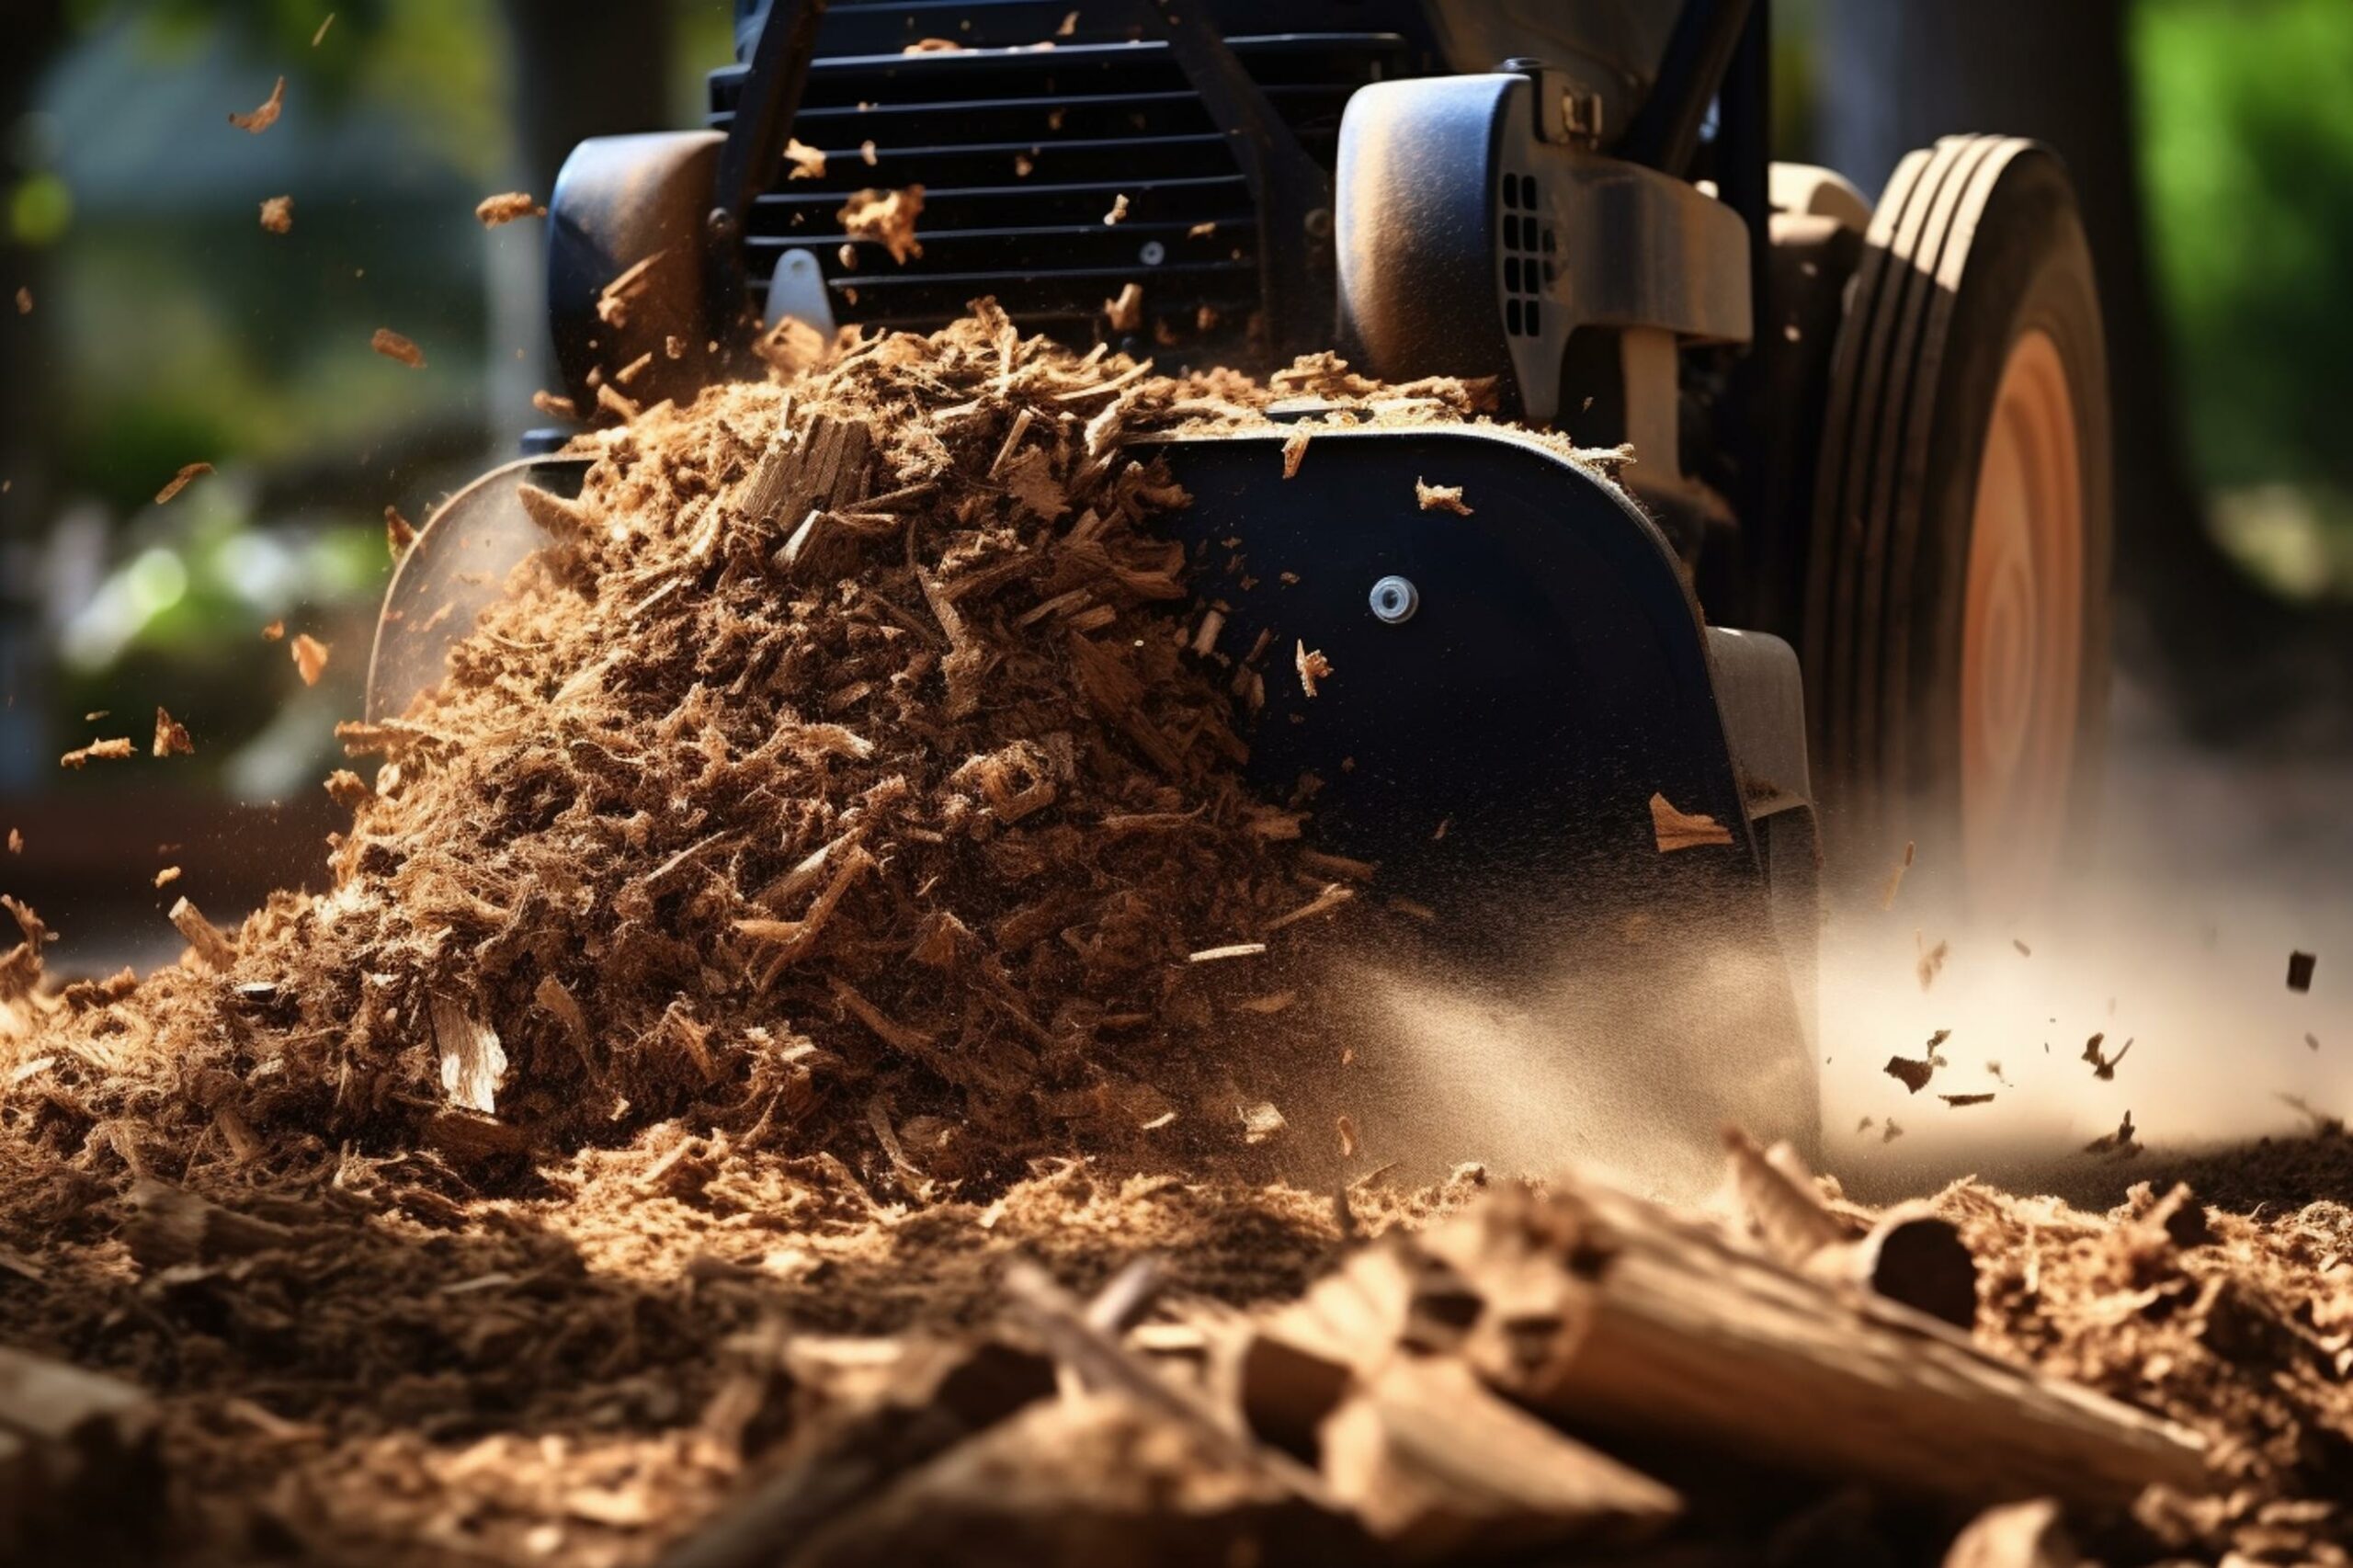 Mr. D's tree stump removal services in baton rouge, louisiana